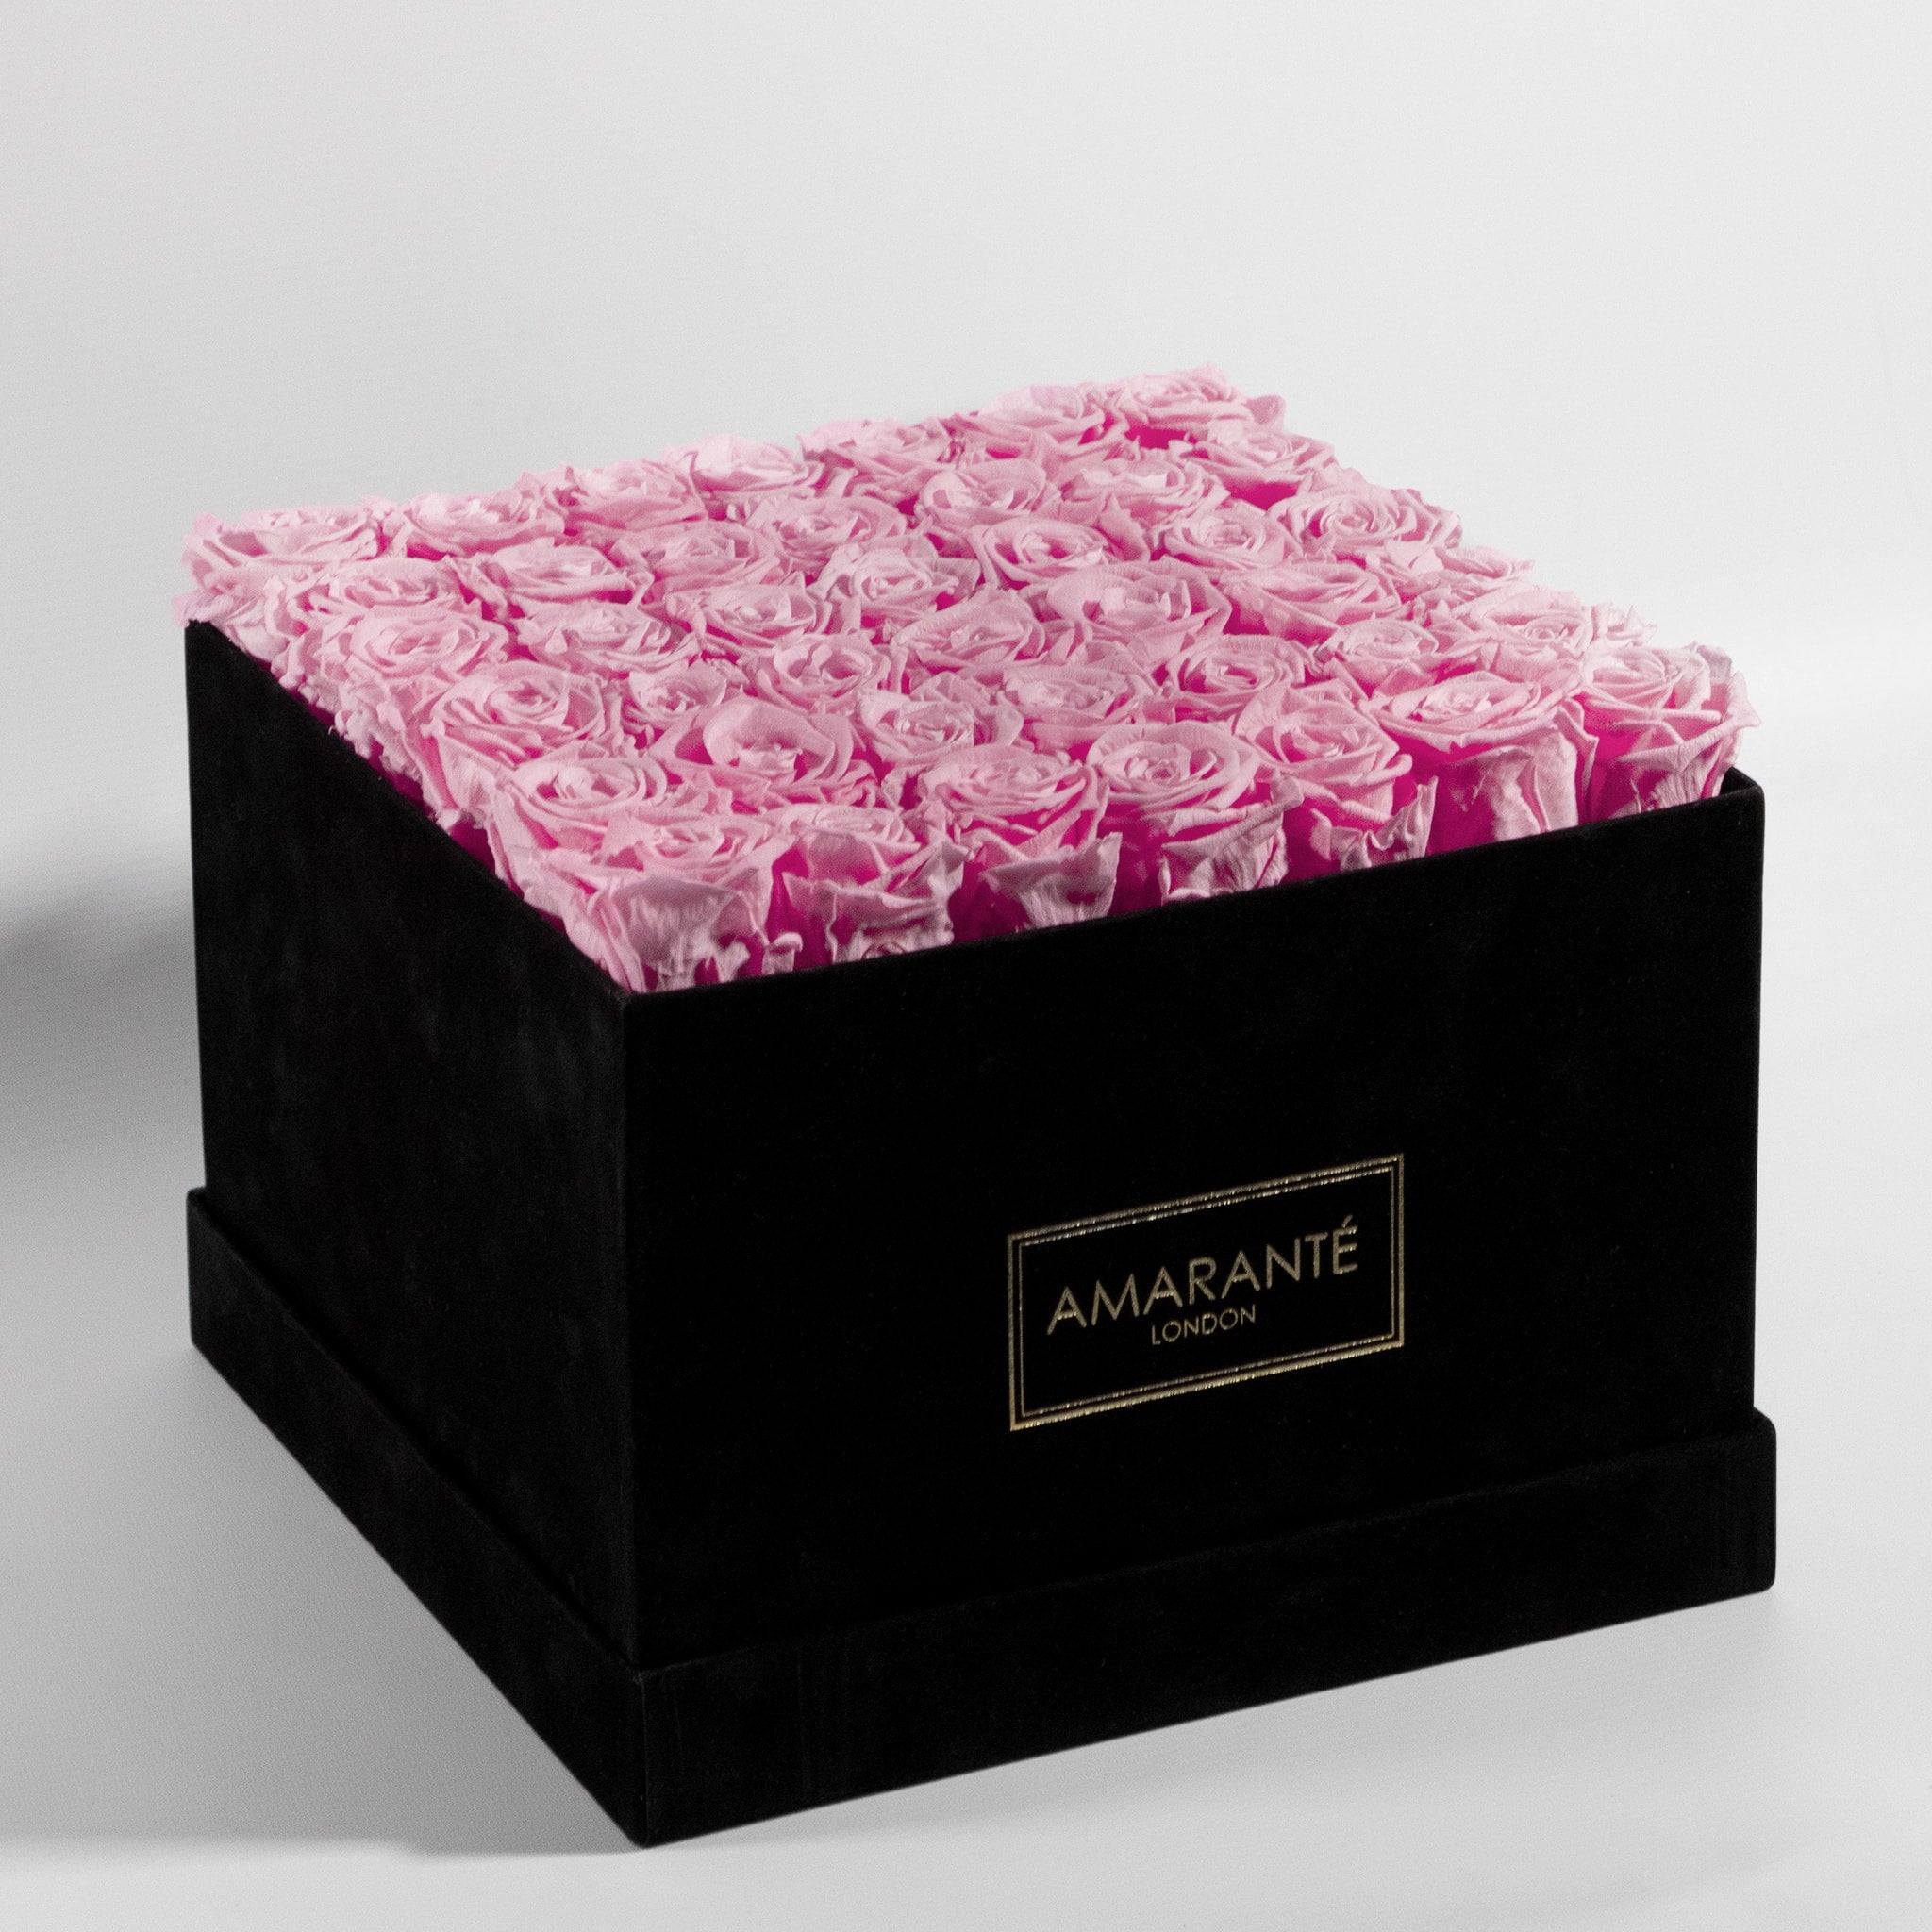 Gift of 36 enchanting pink infinity roses in a stylish black suede hatbox with Free UK Delivery.